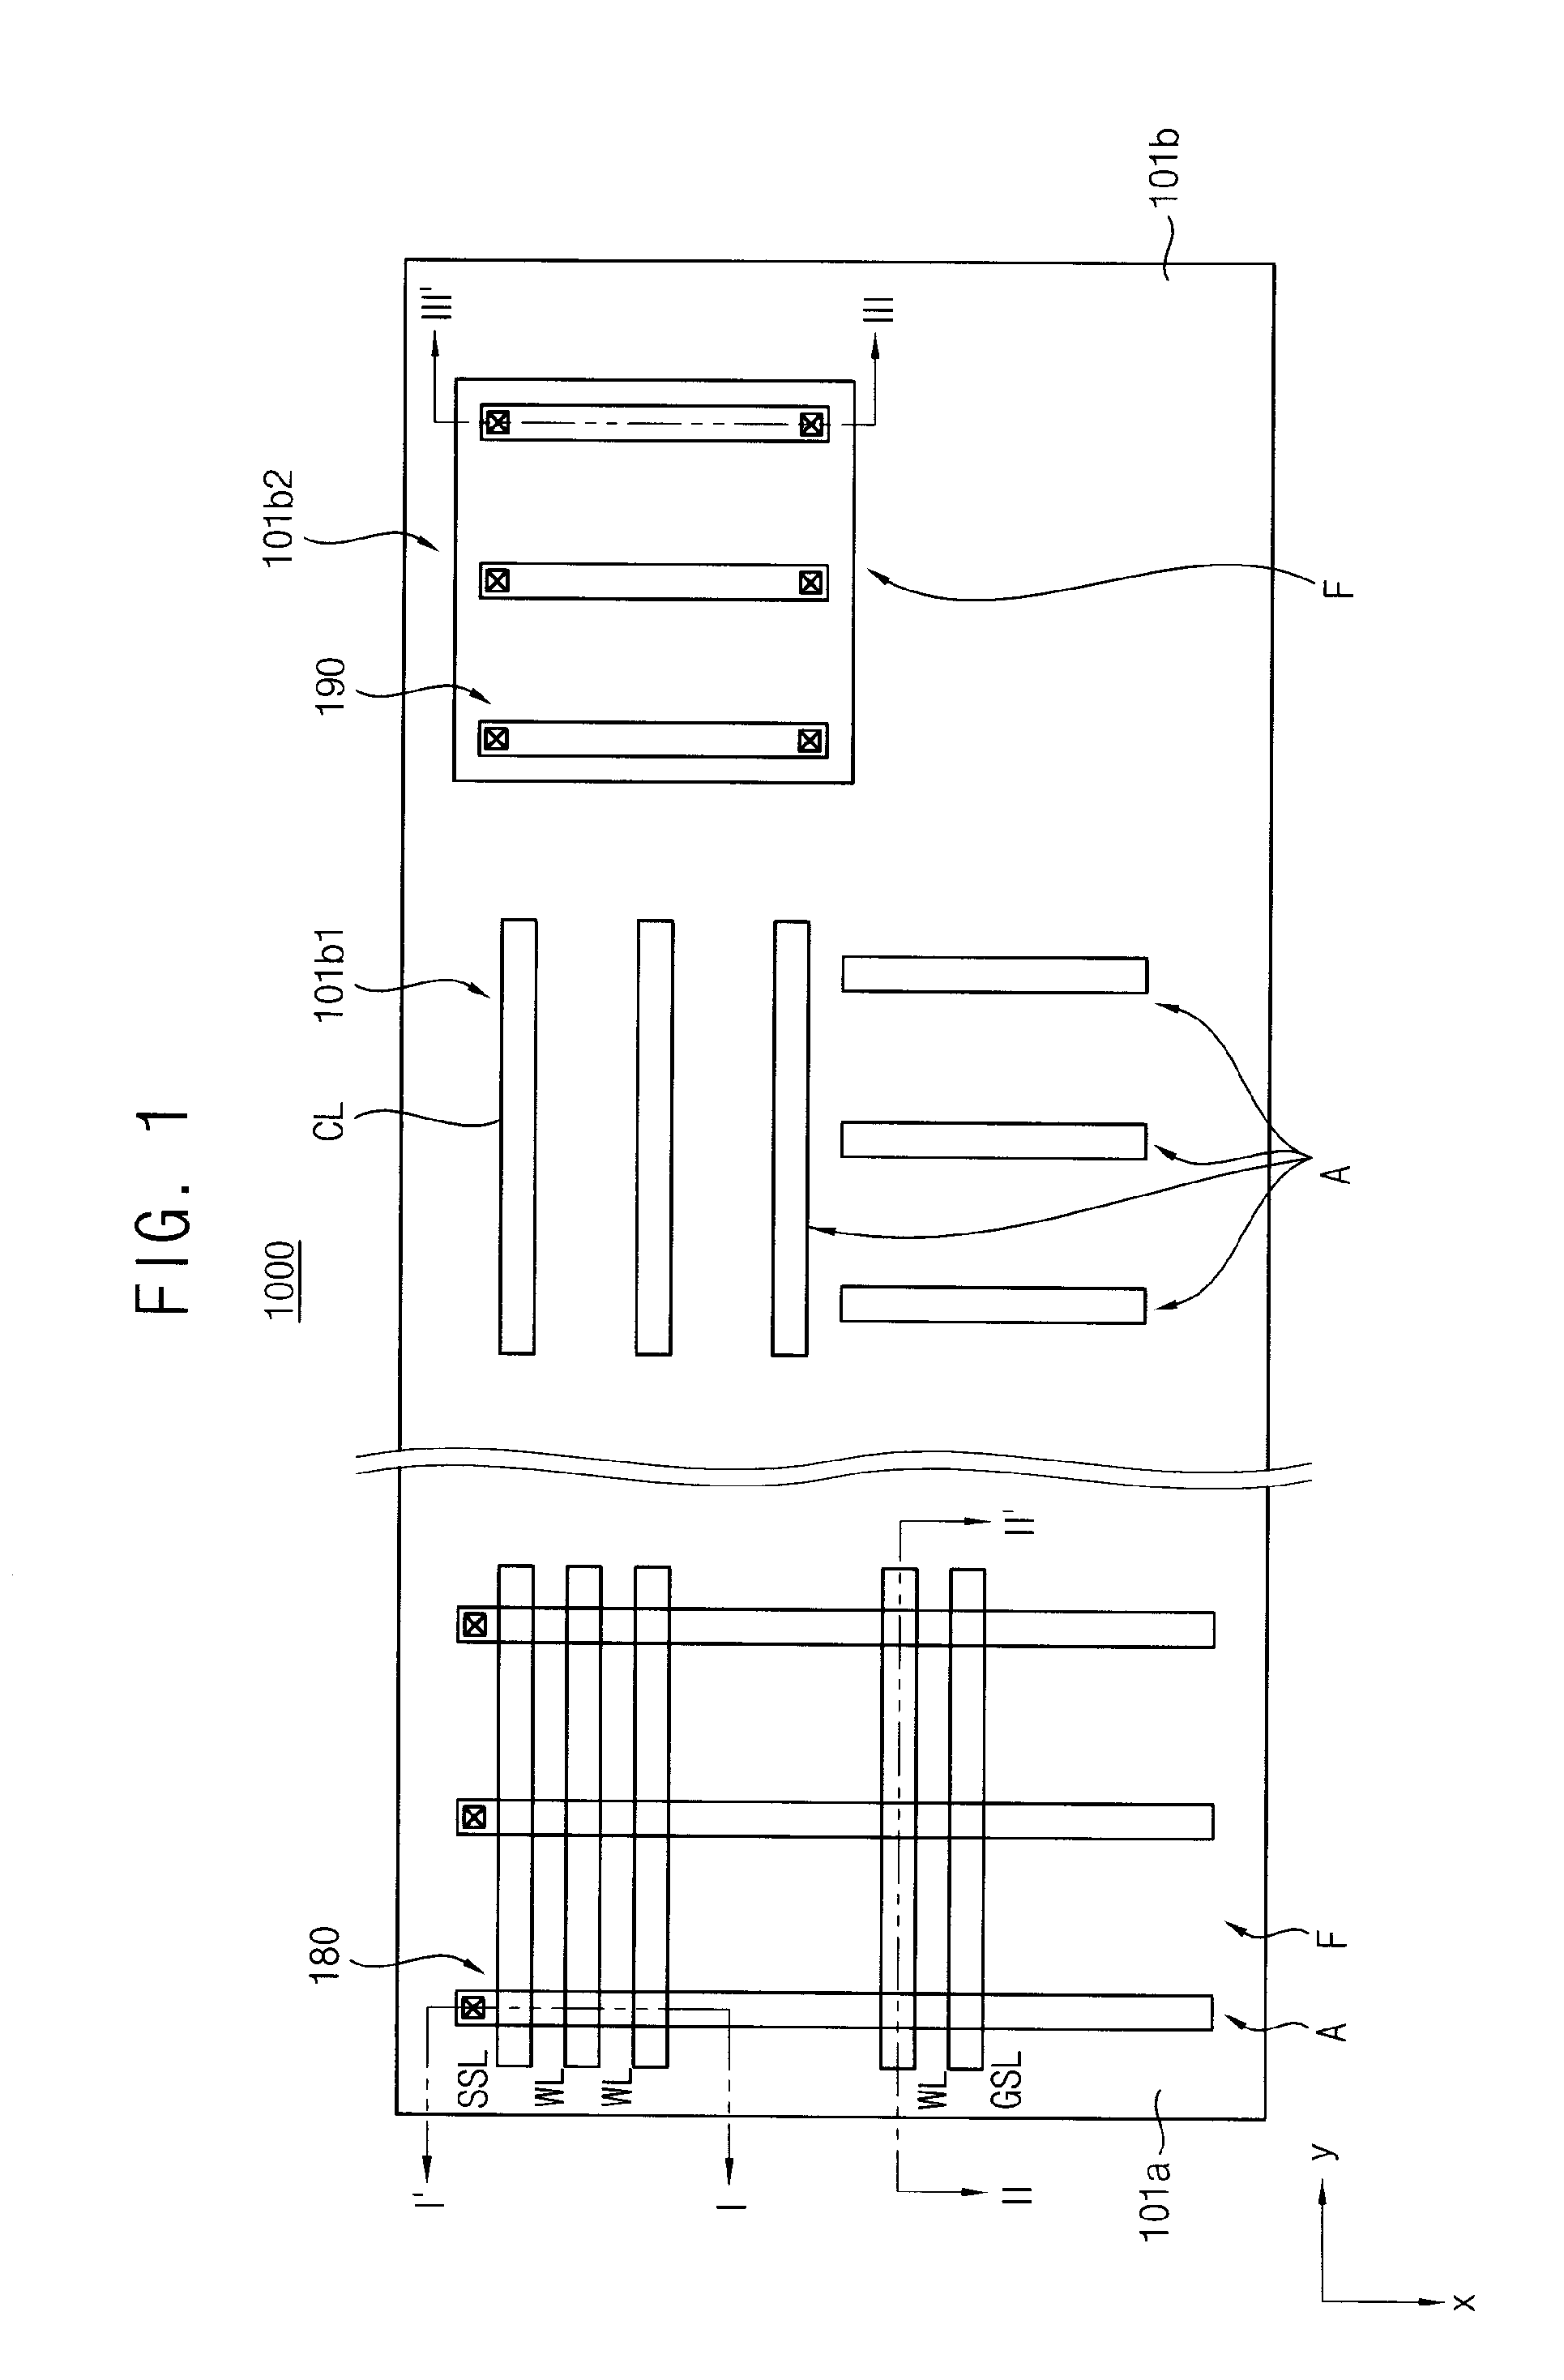 Method of manufacturing an integrated circuit device